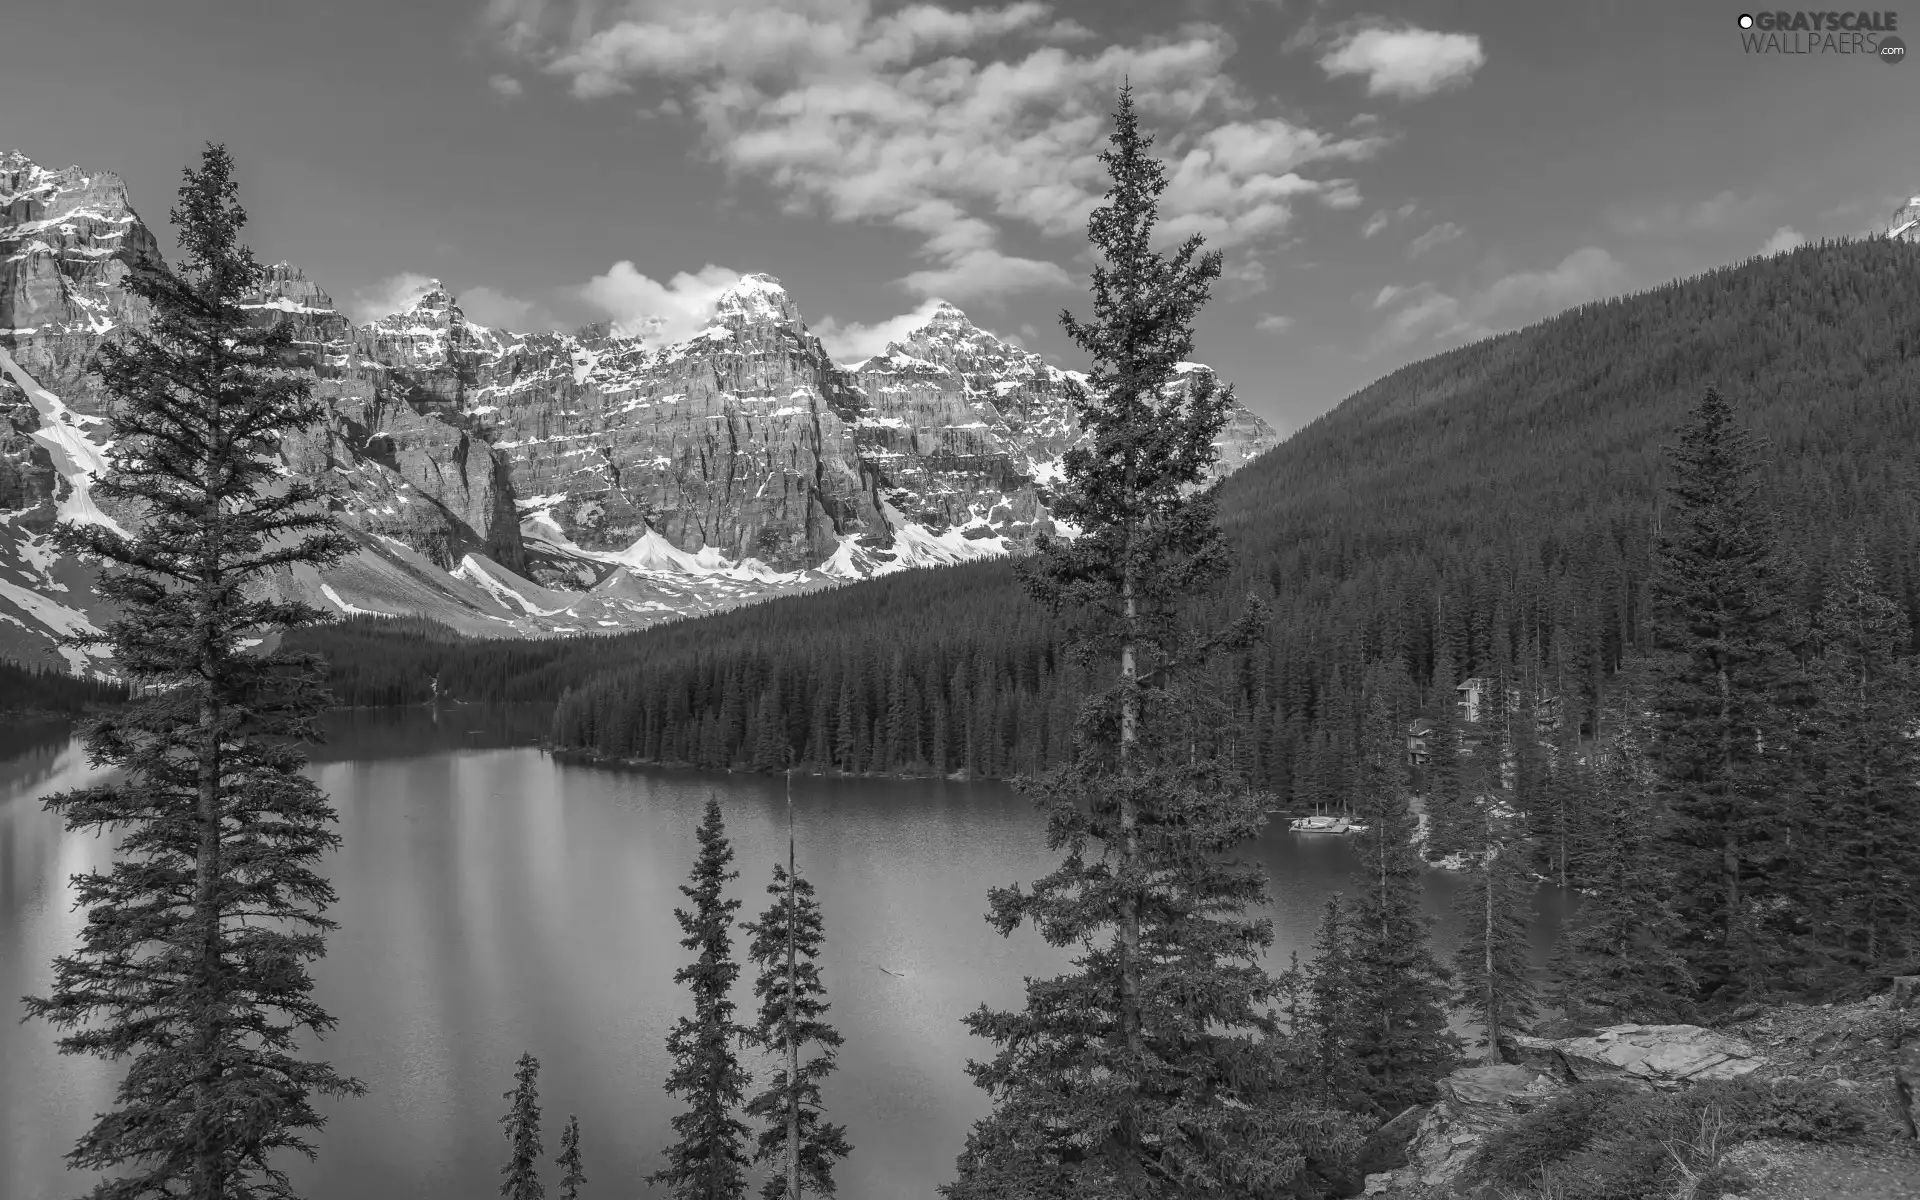 Spruces, lake, forest, Province of Alberta, trees, Mountains, Moraine Lake, Canada, Banff National Park, viewes